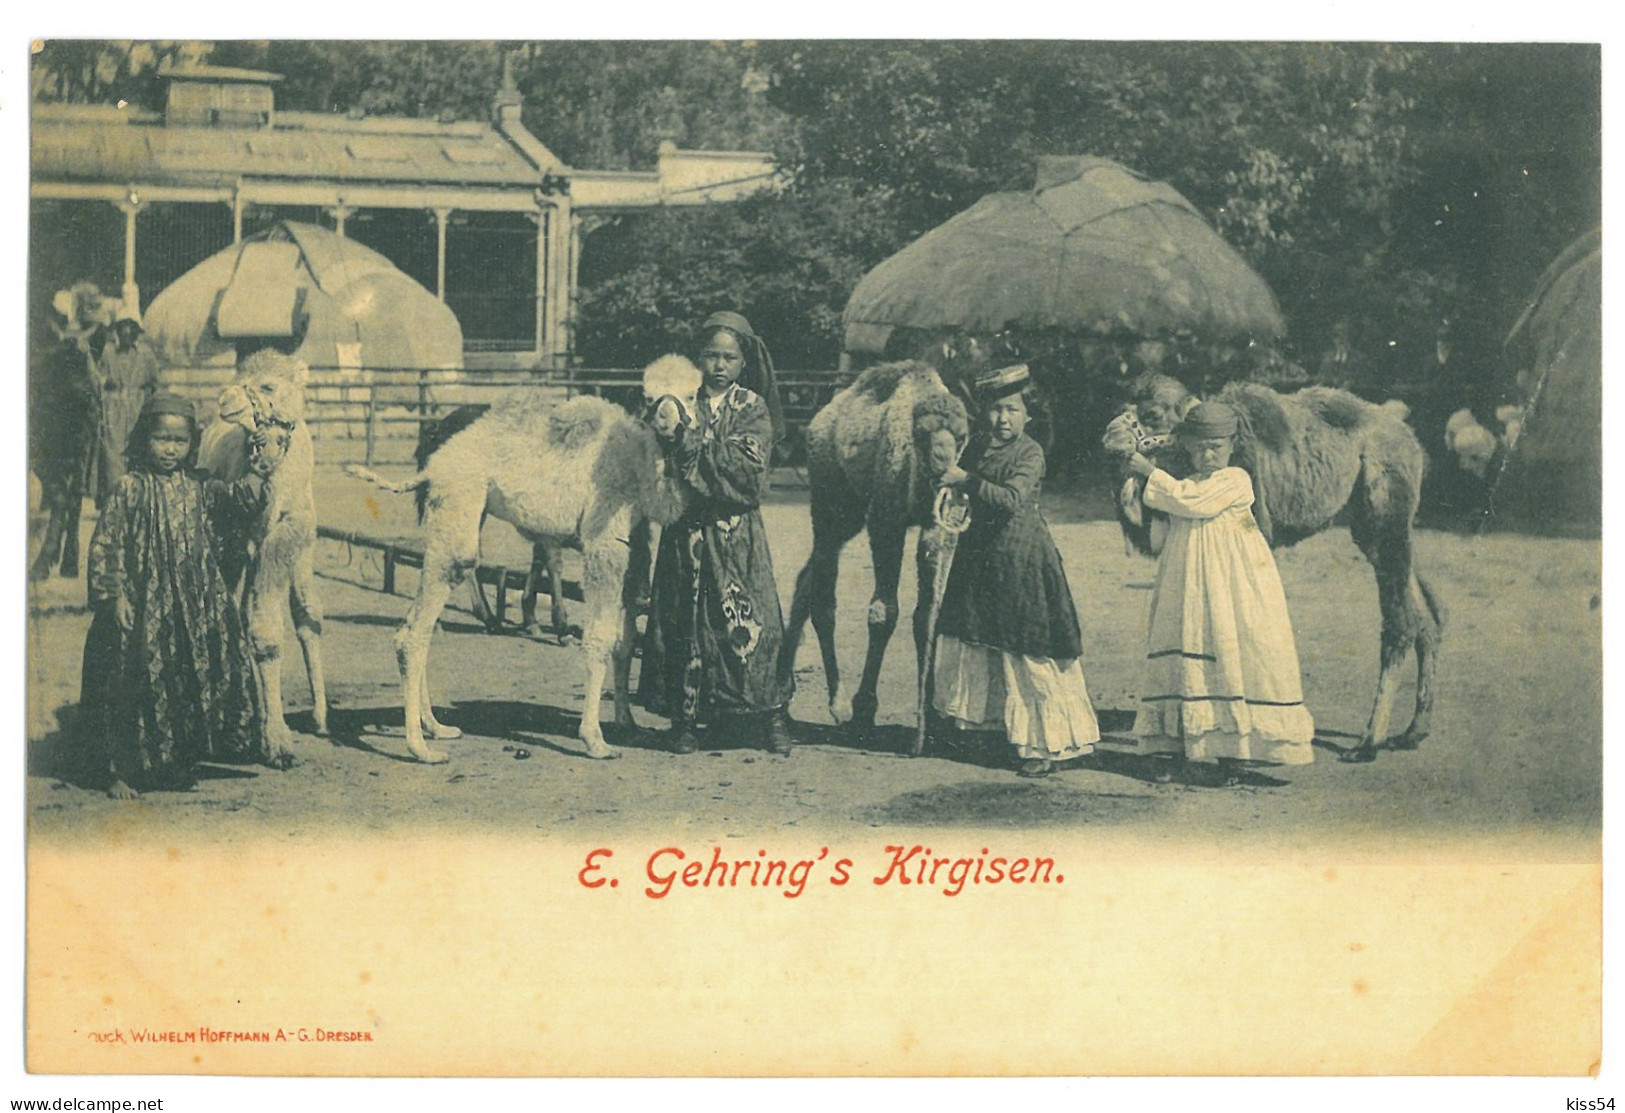 RUS 001 - 21370 Ethnic Ghirghiz With Camels, Russia - Old Postcard - Unused - Russia